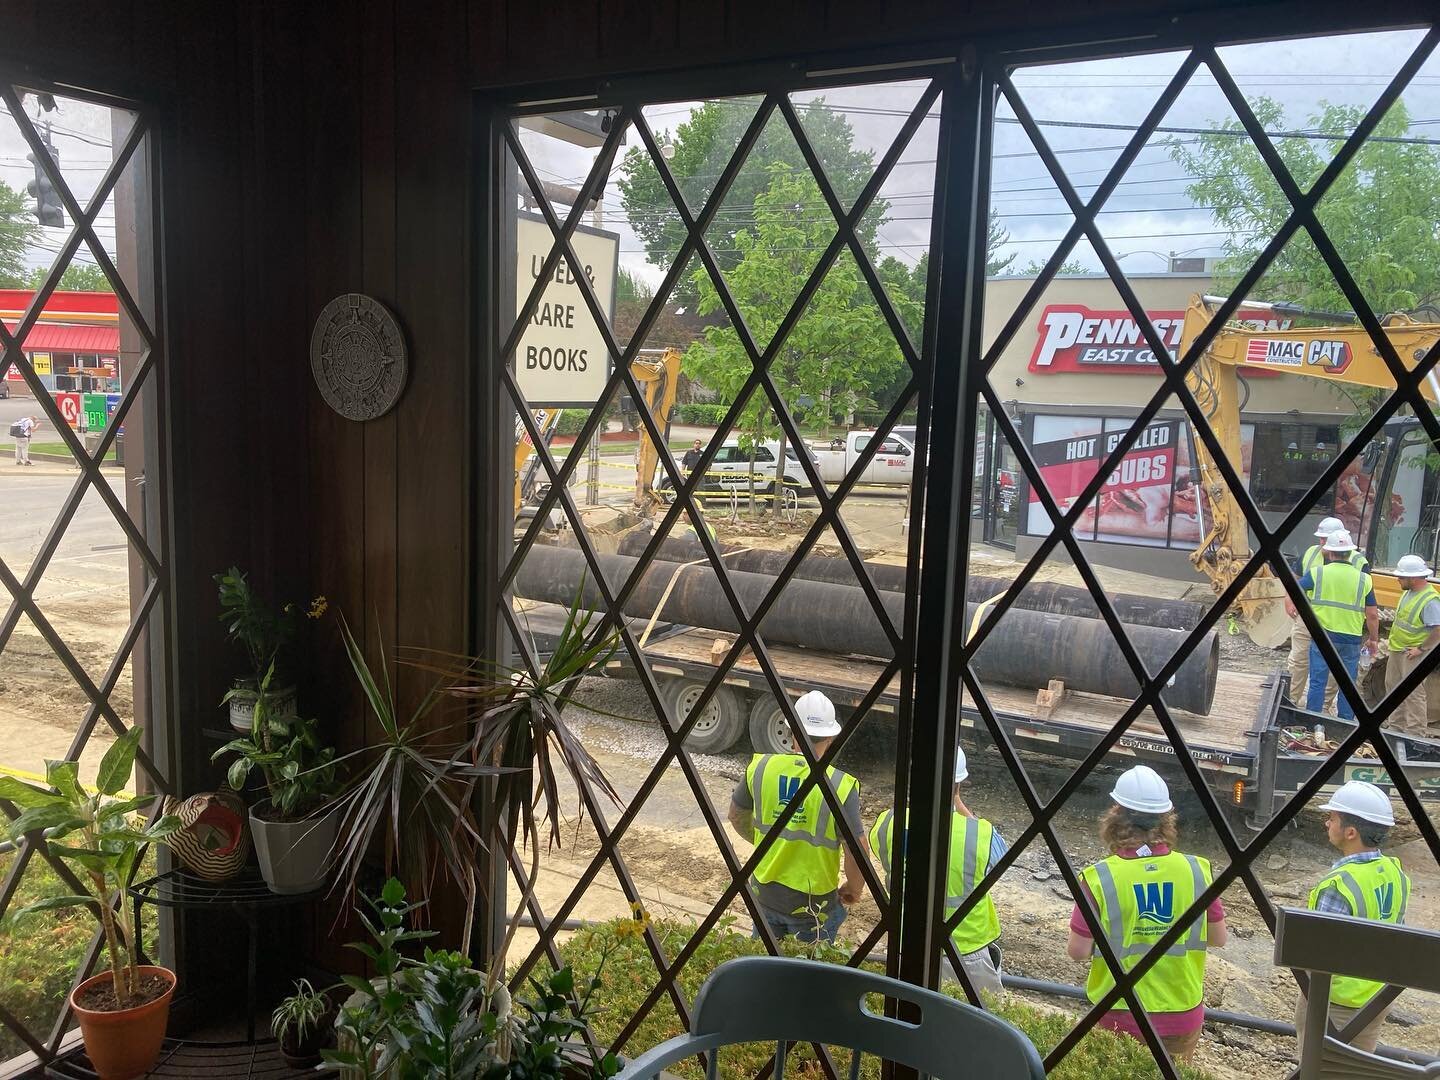 Due to a significant water main break, Woodlawn is still closed between 3rd Street and Southern Parkway. Here&rsquo;s the view from our windows today. Unfortunately we aren&rsquo;t going to open the bookstore with all this happening, but we hope to b